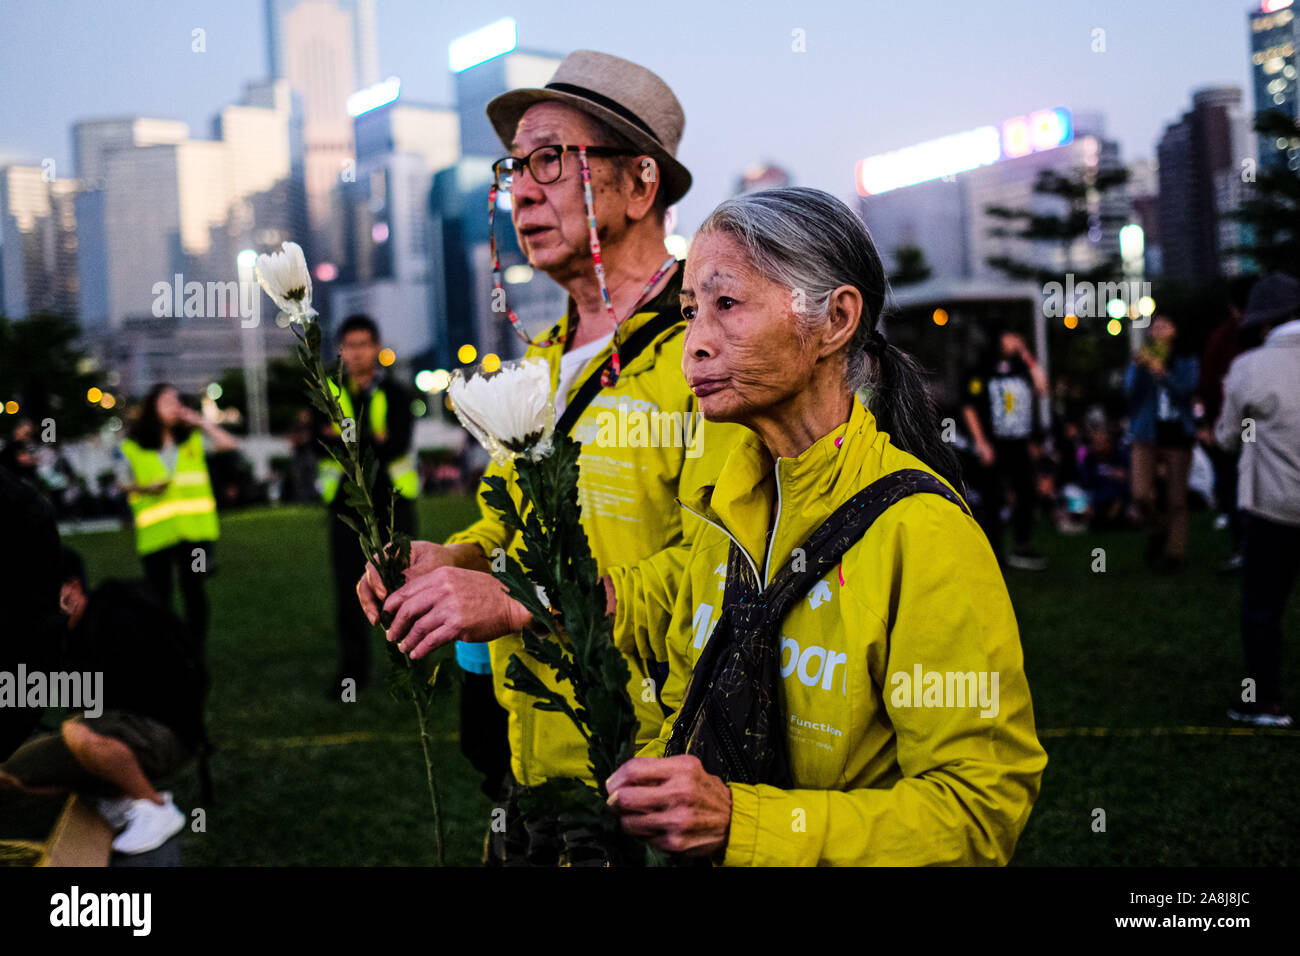 Hong Kong, China. 9th Nov, 2019. A senior couple offer flowers during a memorial rally at Tamar Park in Hong Kong to mourn the death of a 22 years old university student Alex Chow Tsz Lok, who died from a serious brain injury during a fall on November 4th as police skirmished with demonstrators last weekend. He was left in critical condition and died after suffering a cardiac arrest on Friday. Credit: Keith Tsuji/ZUMA Wire/Alamy Live News Stock Photo